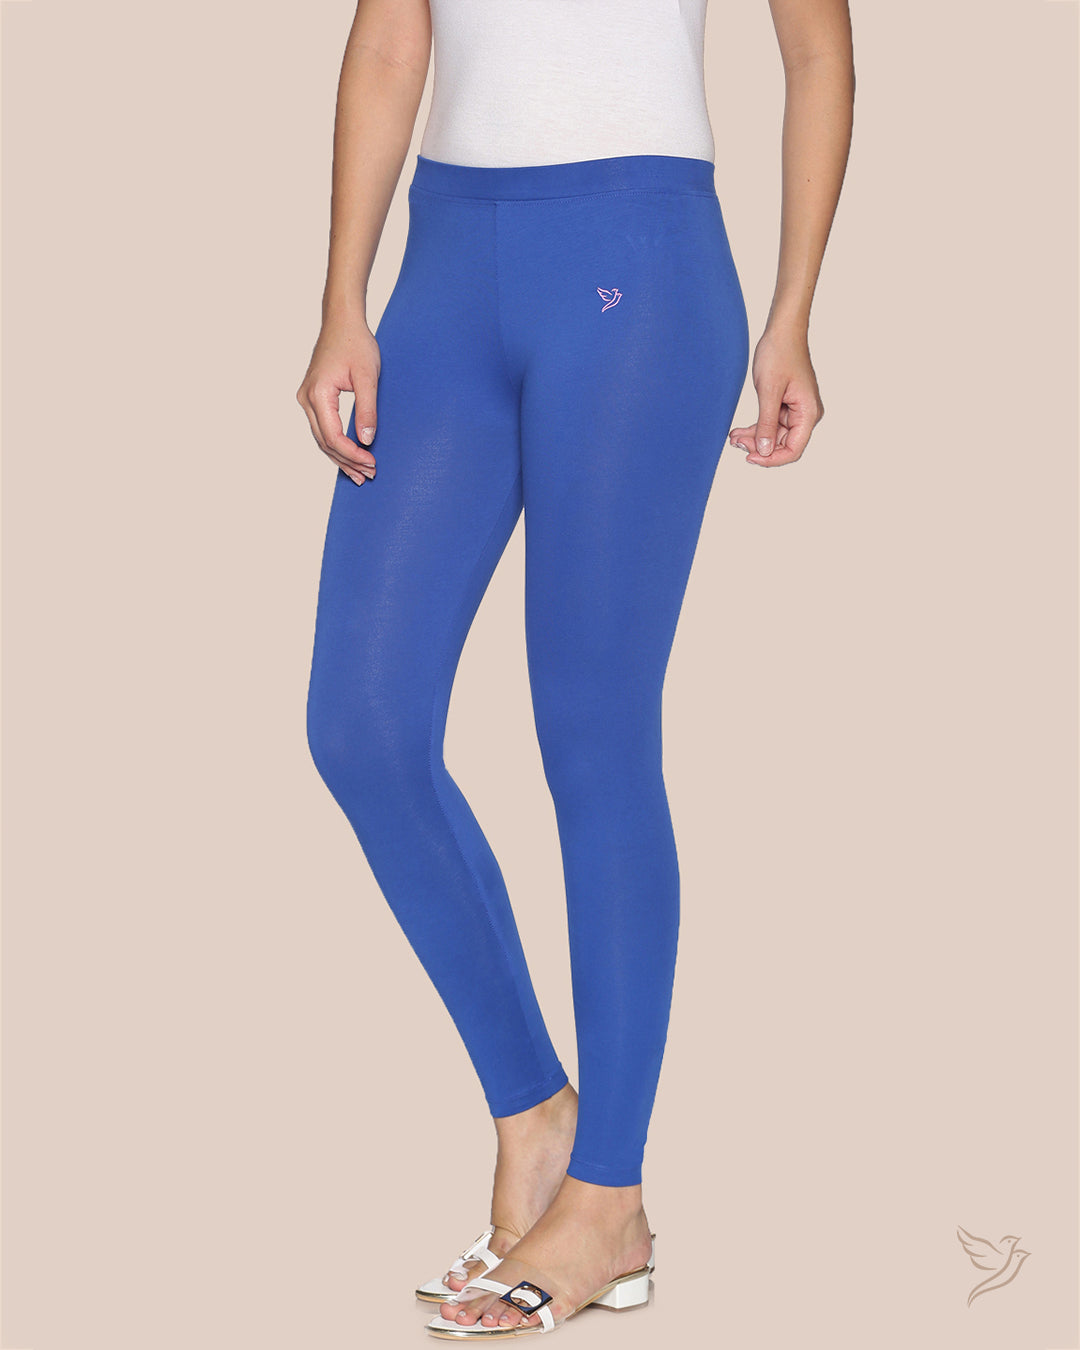 Blue Chip Cotton Ankle Legging for College girls